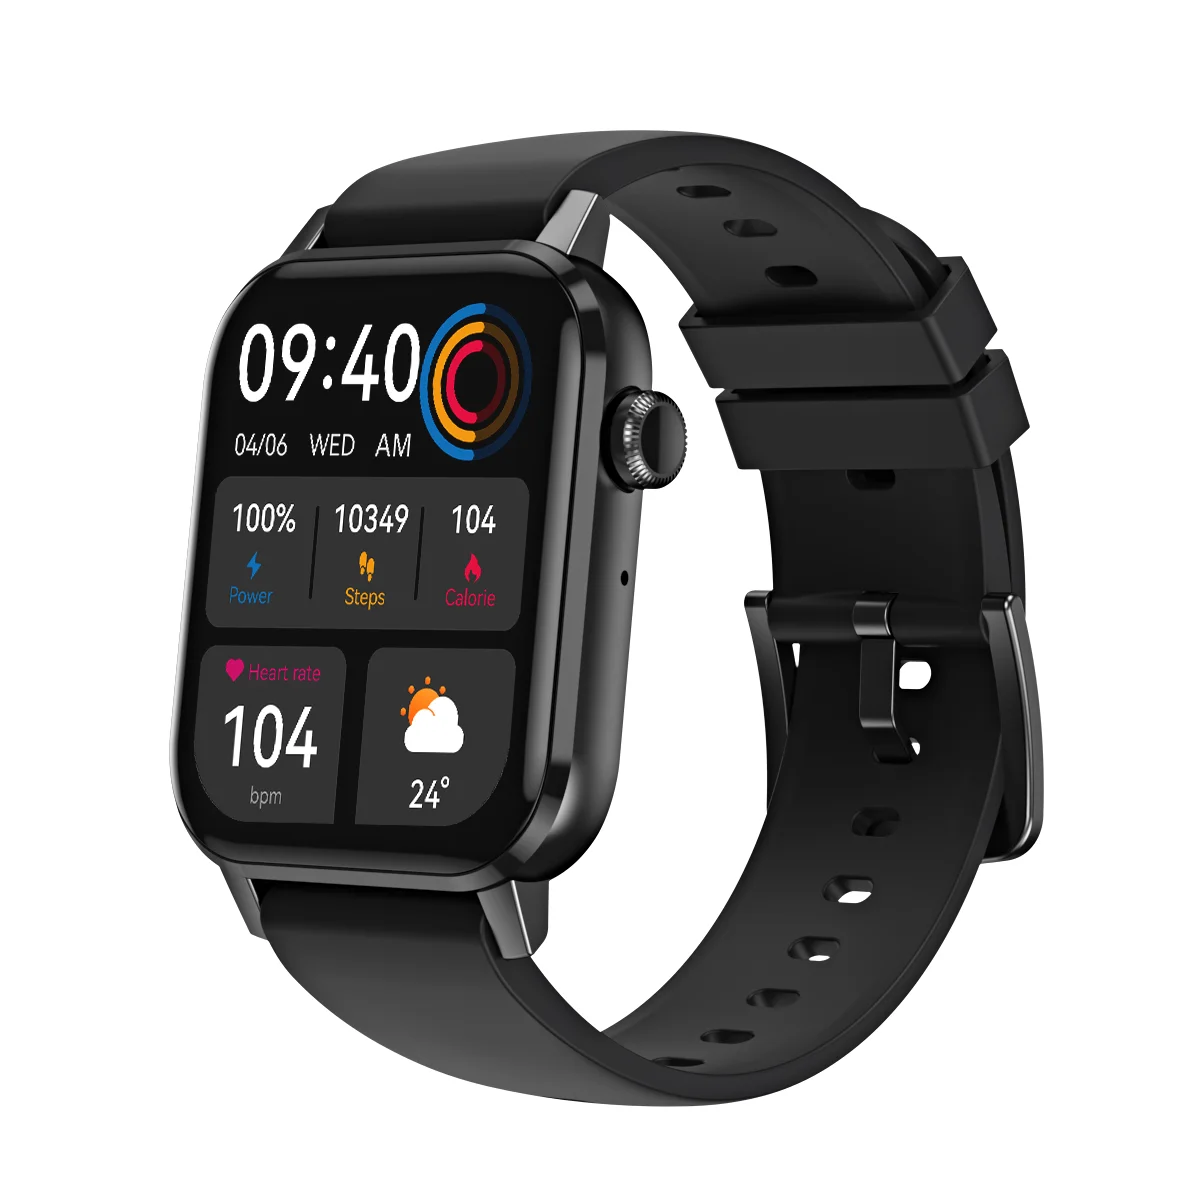 

Smart Watch, Activity Fitness Tracker for Women Men, Smartwatch for Android & iOS Phones, Heart Rate Monitor, IP67 Waterproof